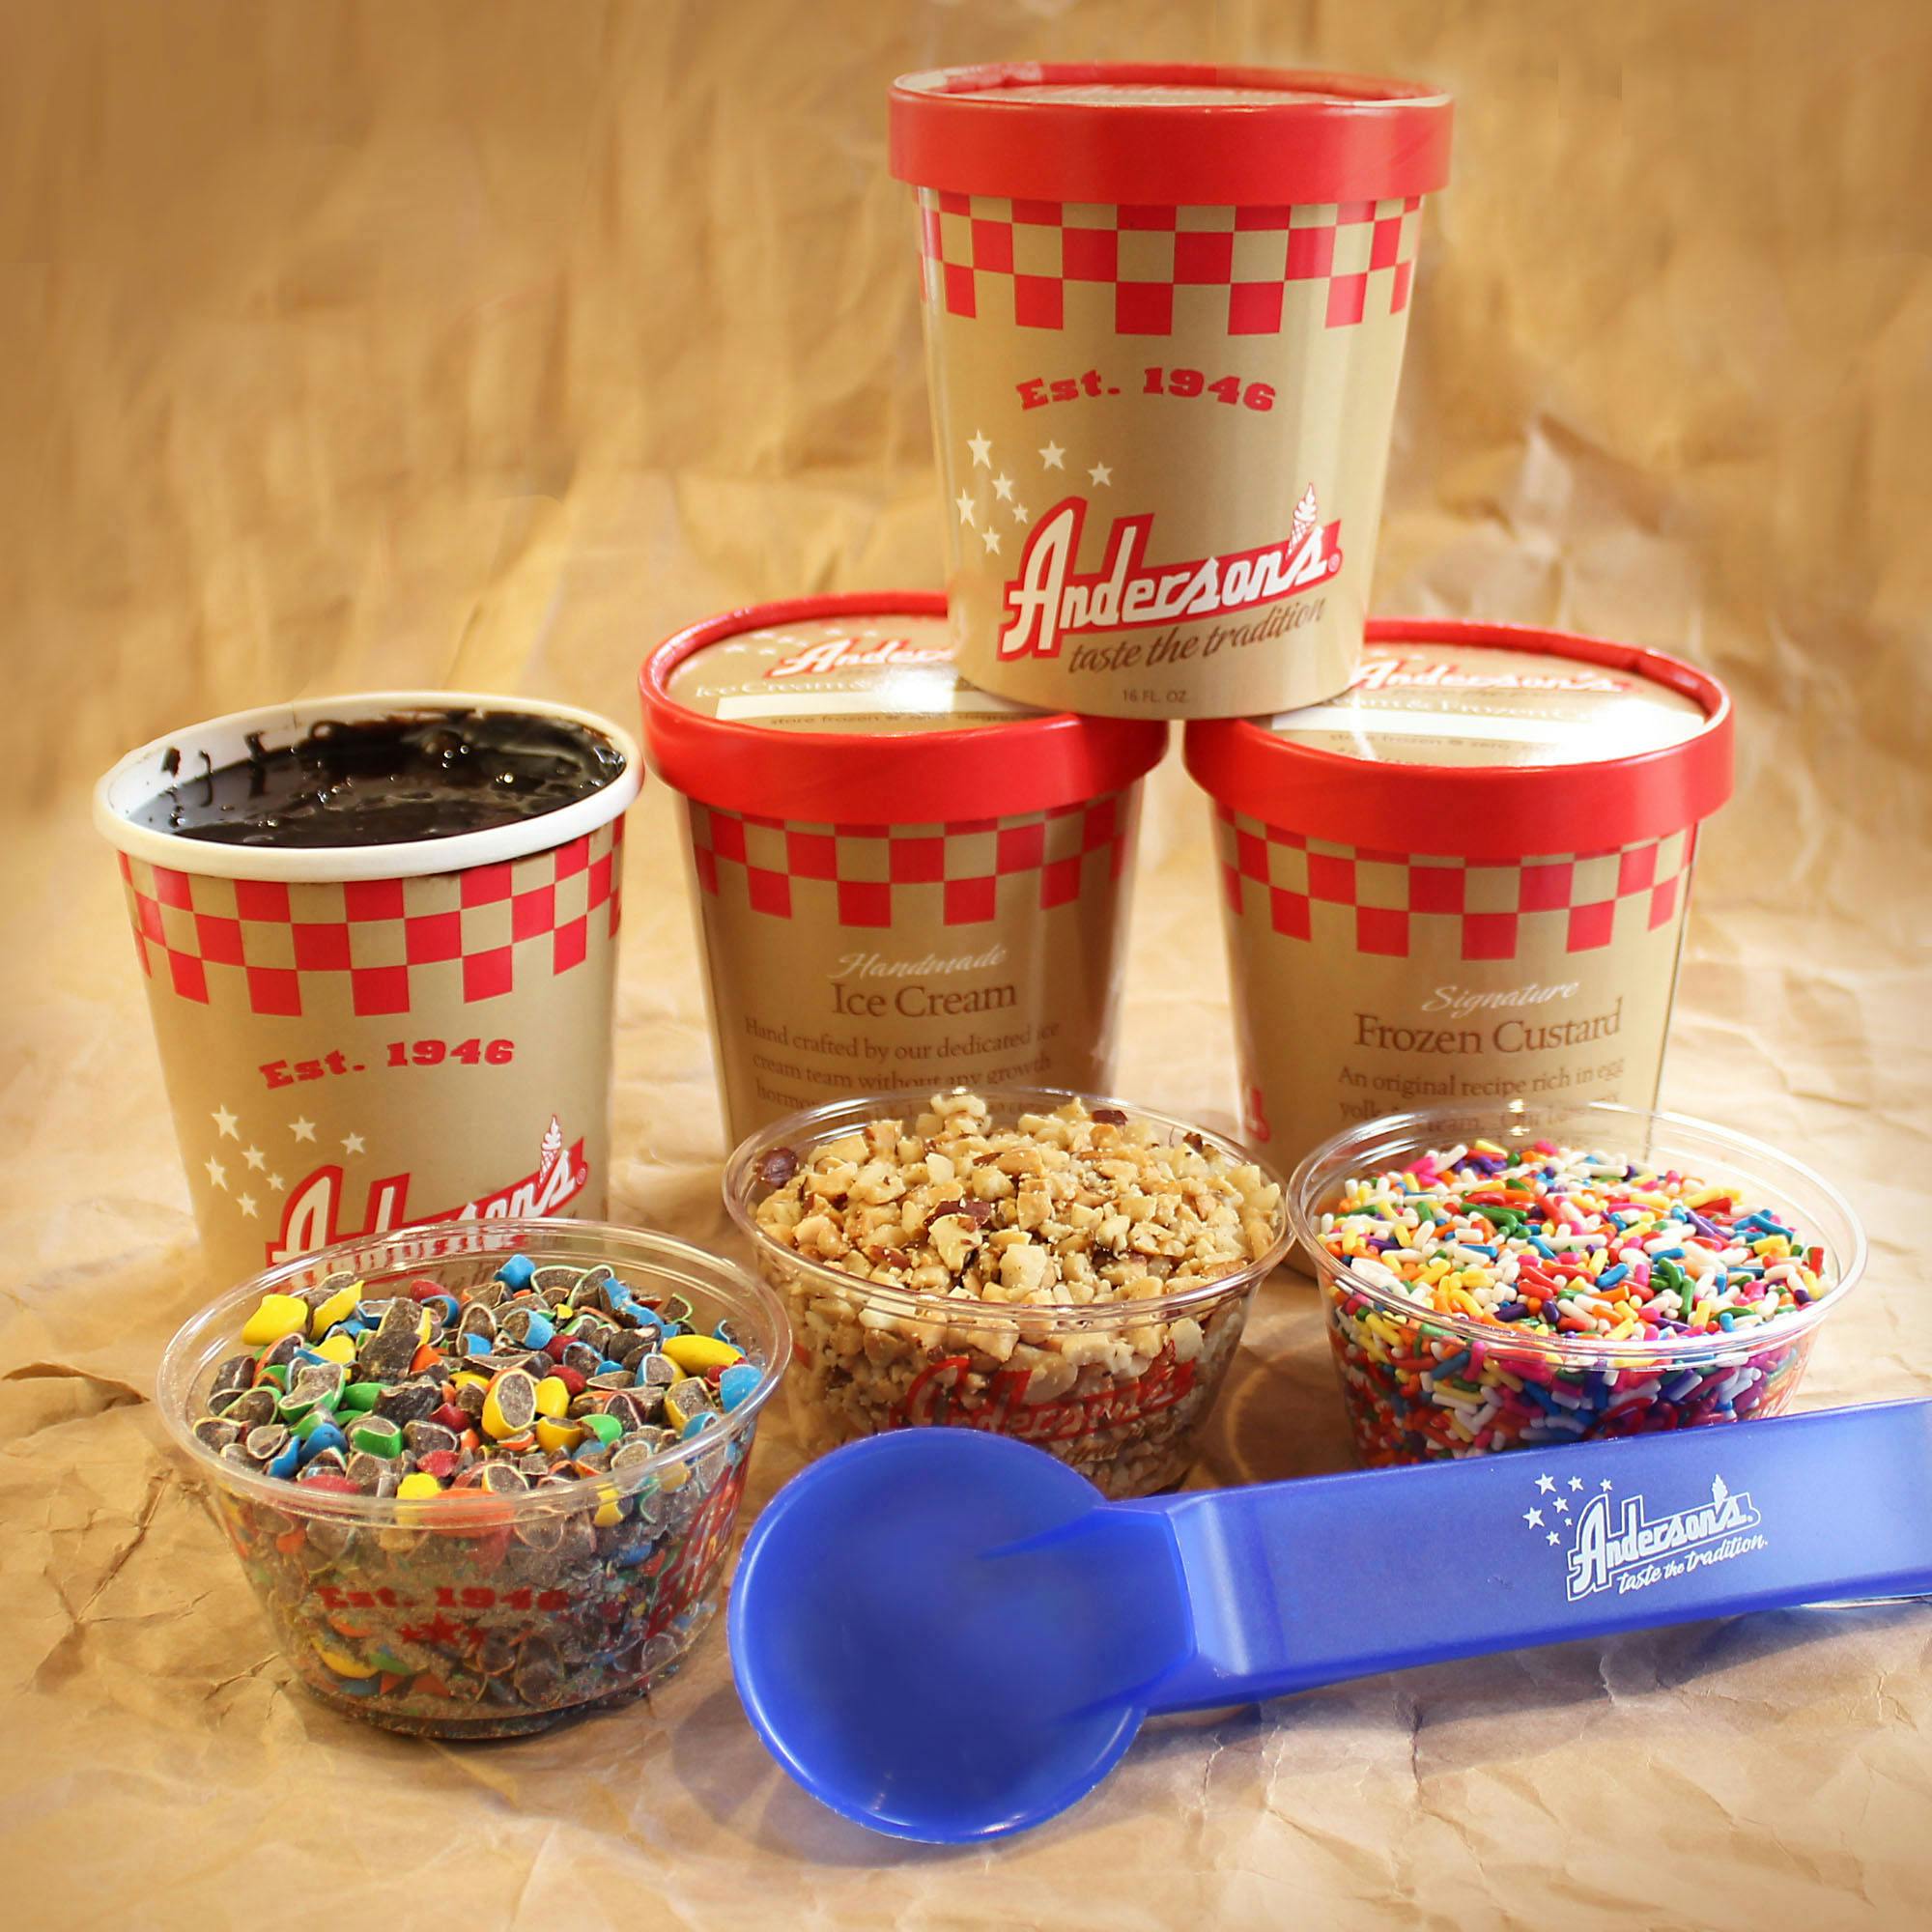 Anderson's Sundae Party Pack for 8 by Anderson's Frozen Custard Goldbelly